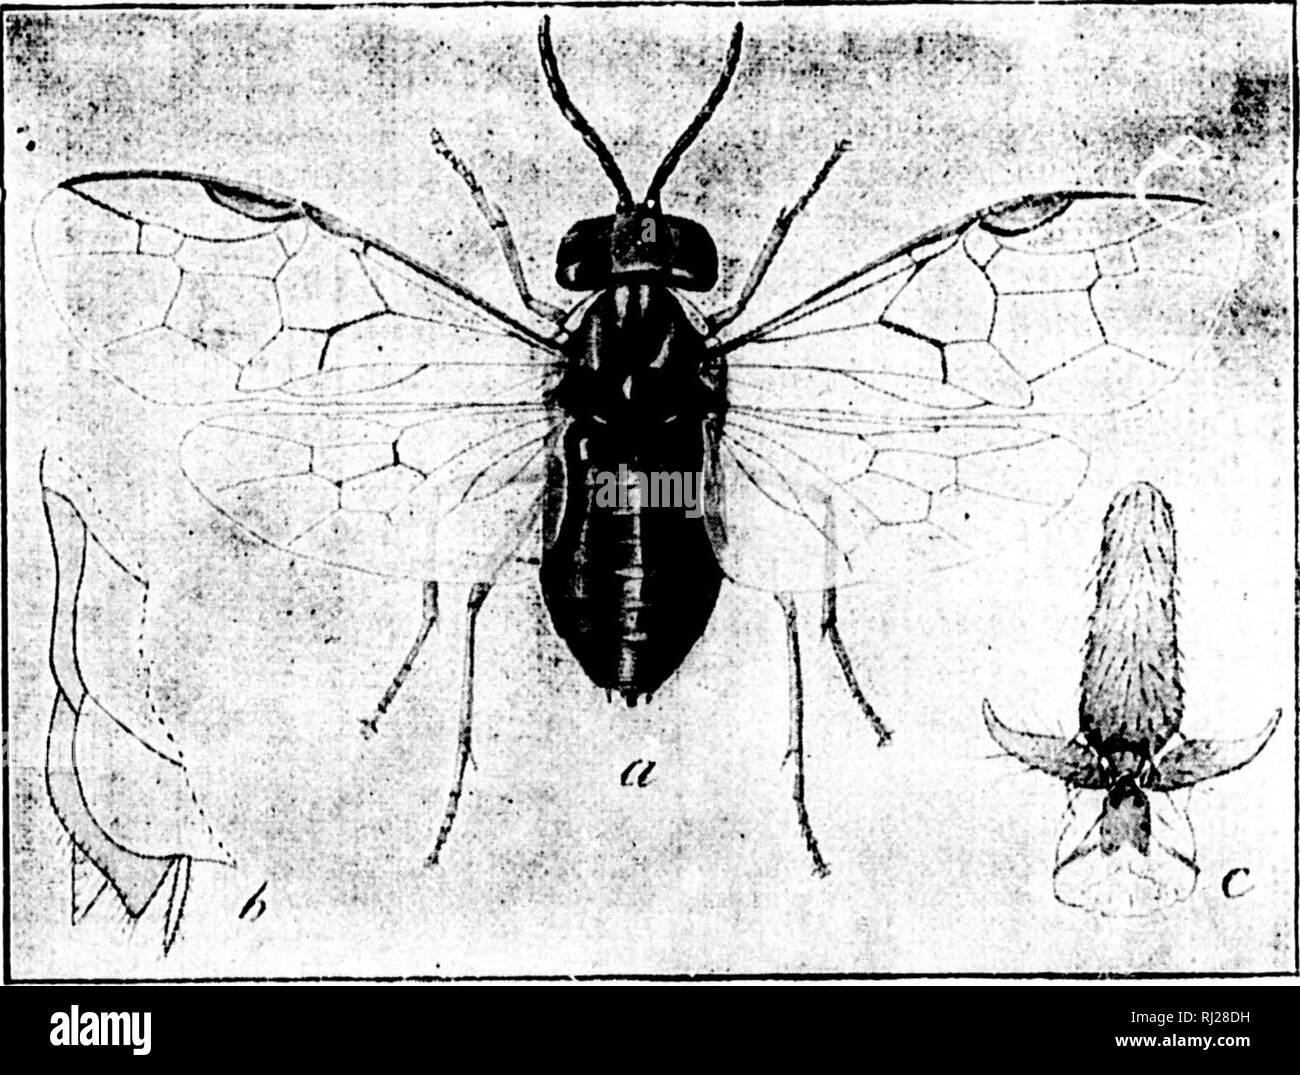 . Revision of the Nematinae of North America [microform] : a subfamily of leaf-feeding Hymenoptera of the family Tenthredinidae. Hymenoptera; Insects; Hyménoptères; Insectes. 123 ping, |lavs 3e on fiila', lerior lowii: Eleven females, one collected at Bro(!kp'»rt, N. Y., the others Ined from larva' found on pear trees near SaiTainento. (Jal., the adults issu- in}«- in March. (Coll. U. S. Nat. Mus.) This sawrty was reported by Matthew Cooke to be very injurious! in 1881-82 about Sacramento, Cal., and in adjoining? counties. It feeds on the leaves of i)ear trees, skeletoniziuj^ them more or les Stock Photo